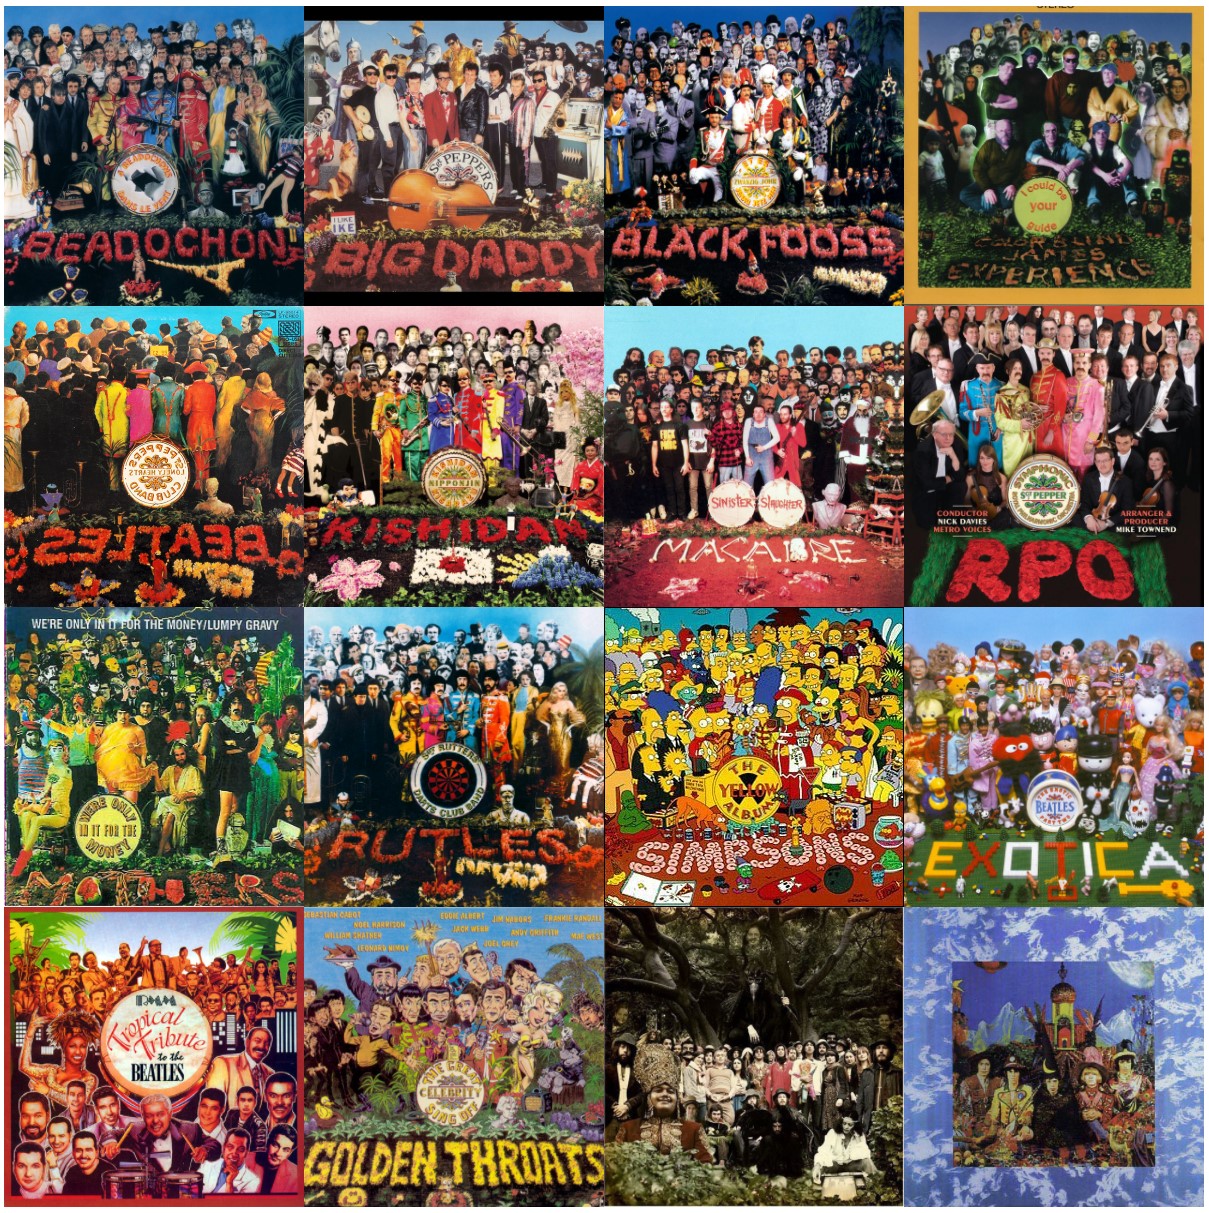 TravelMarx: The Beatles Sgt. Pepper's Lonely Hearts Club Band – Album Cover  Parodies